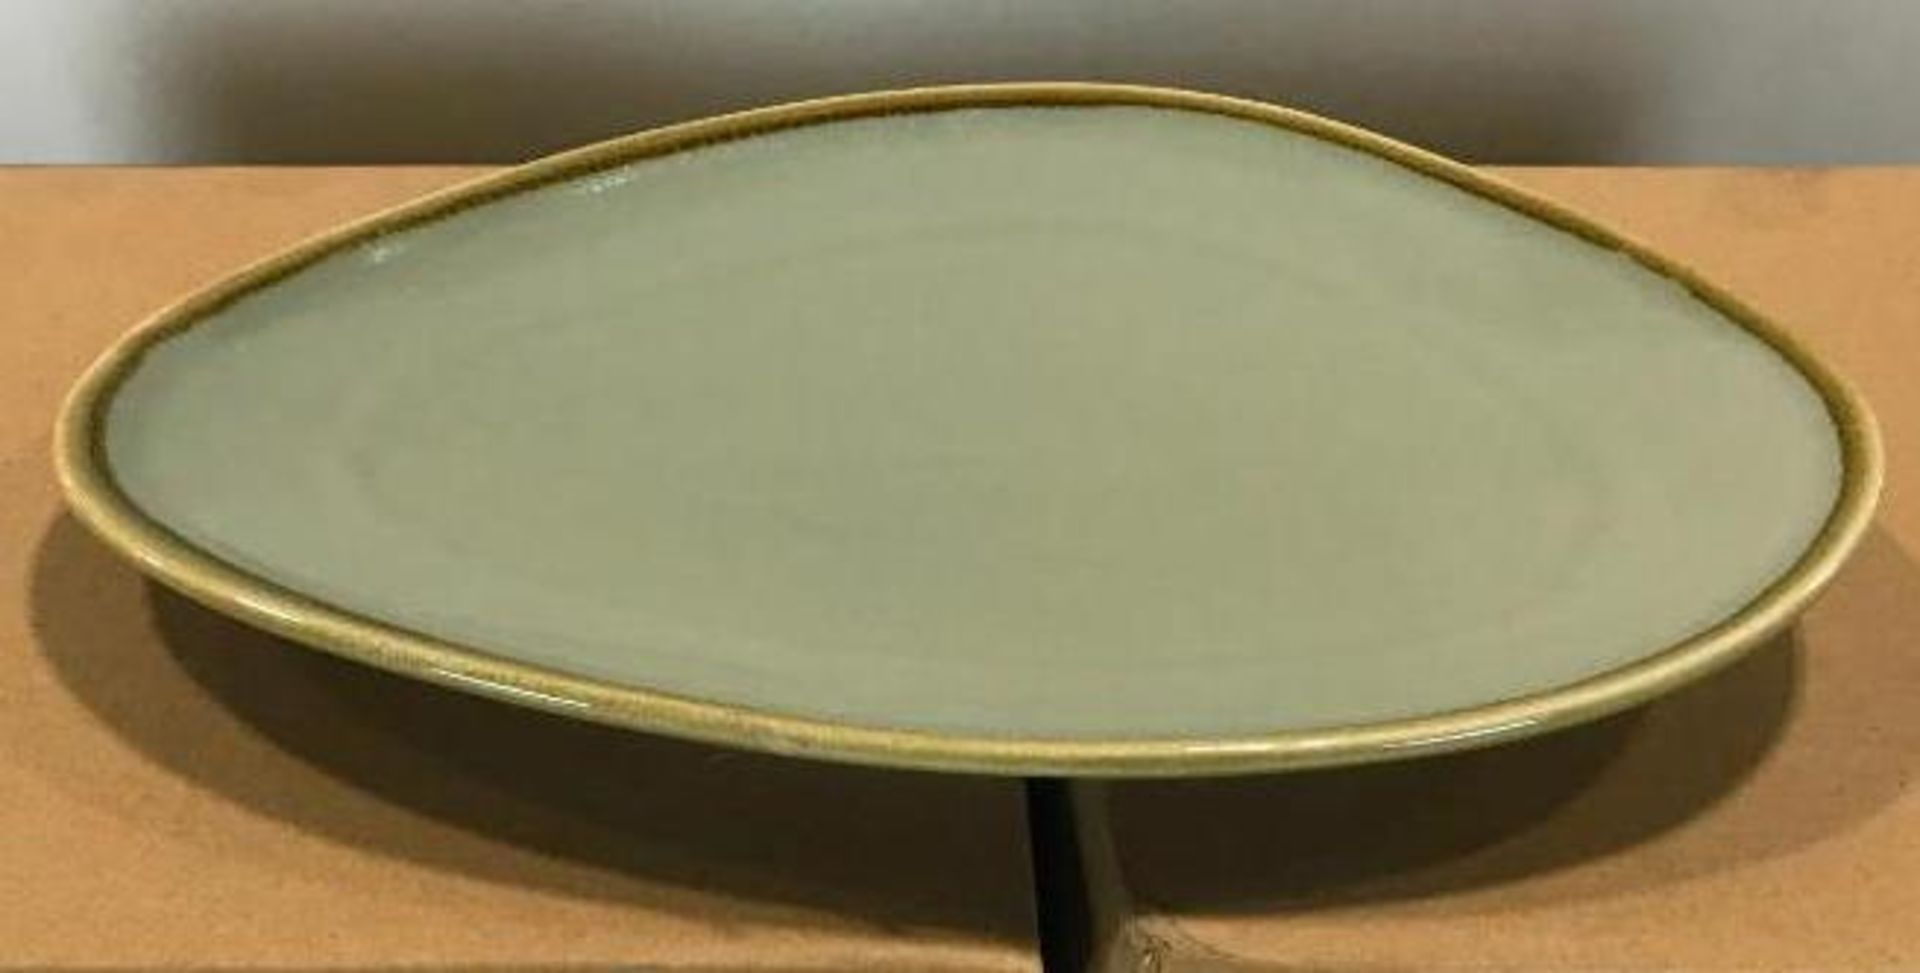 4 CASES OF TERRASTONE 11 1/2" SAGE GREEN OVAL PLATTER - 12/CASE, ARCOROC - NEW - Image 3 of 3